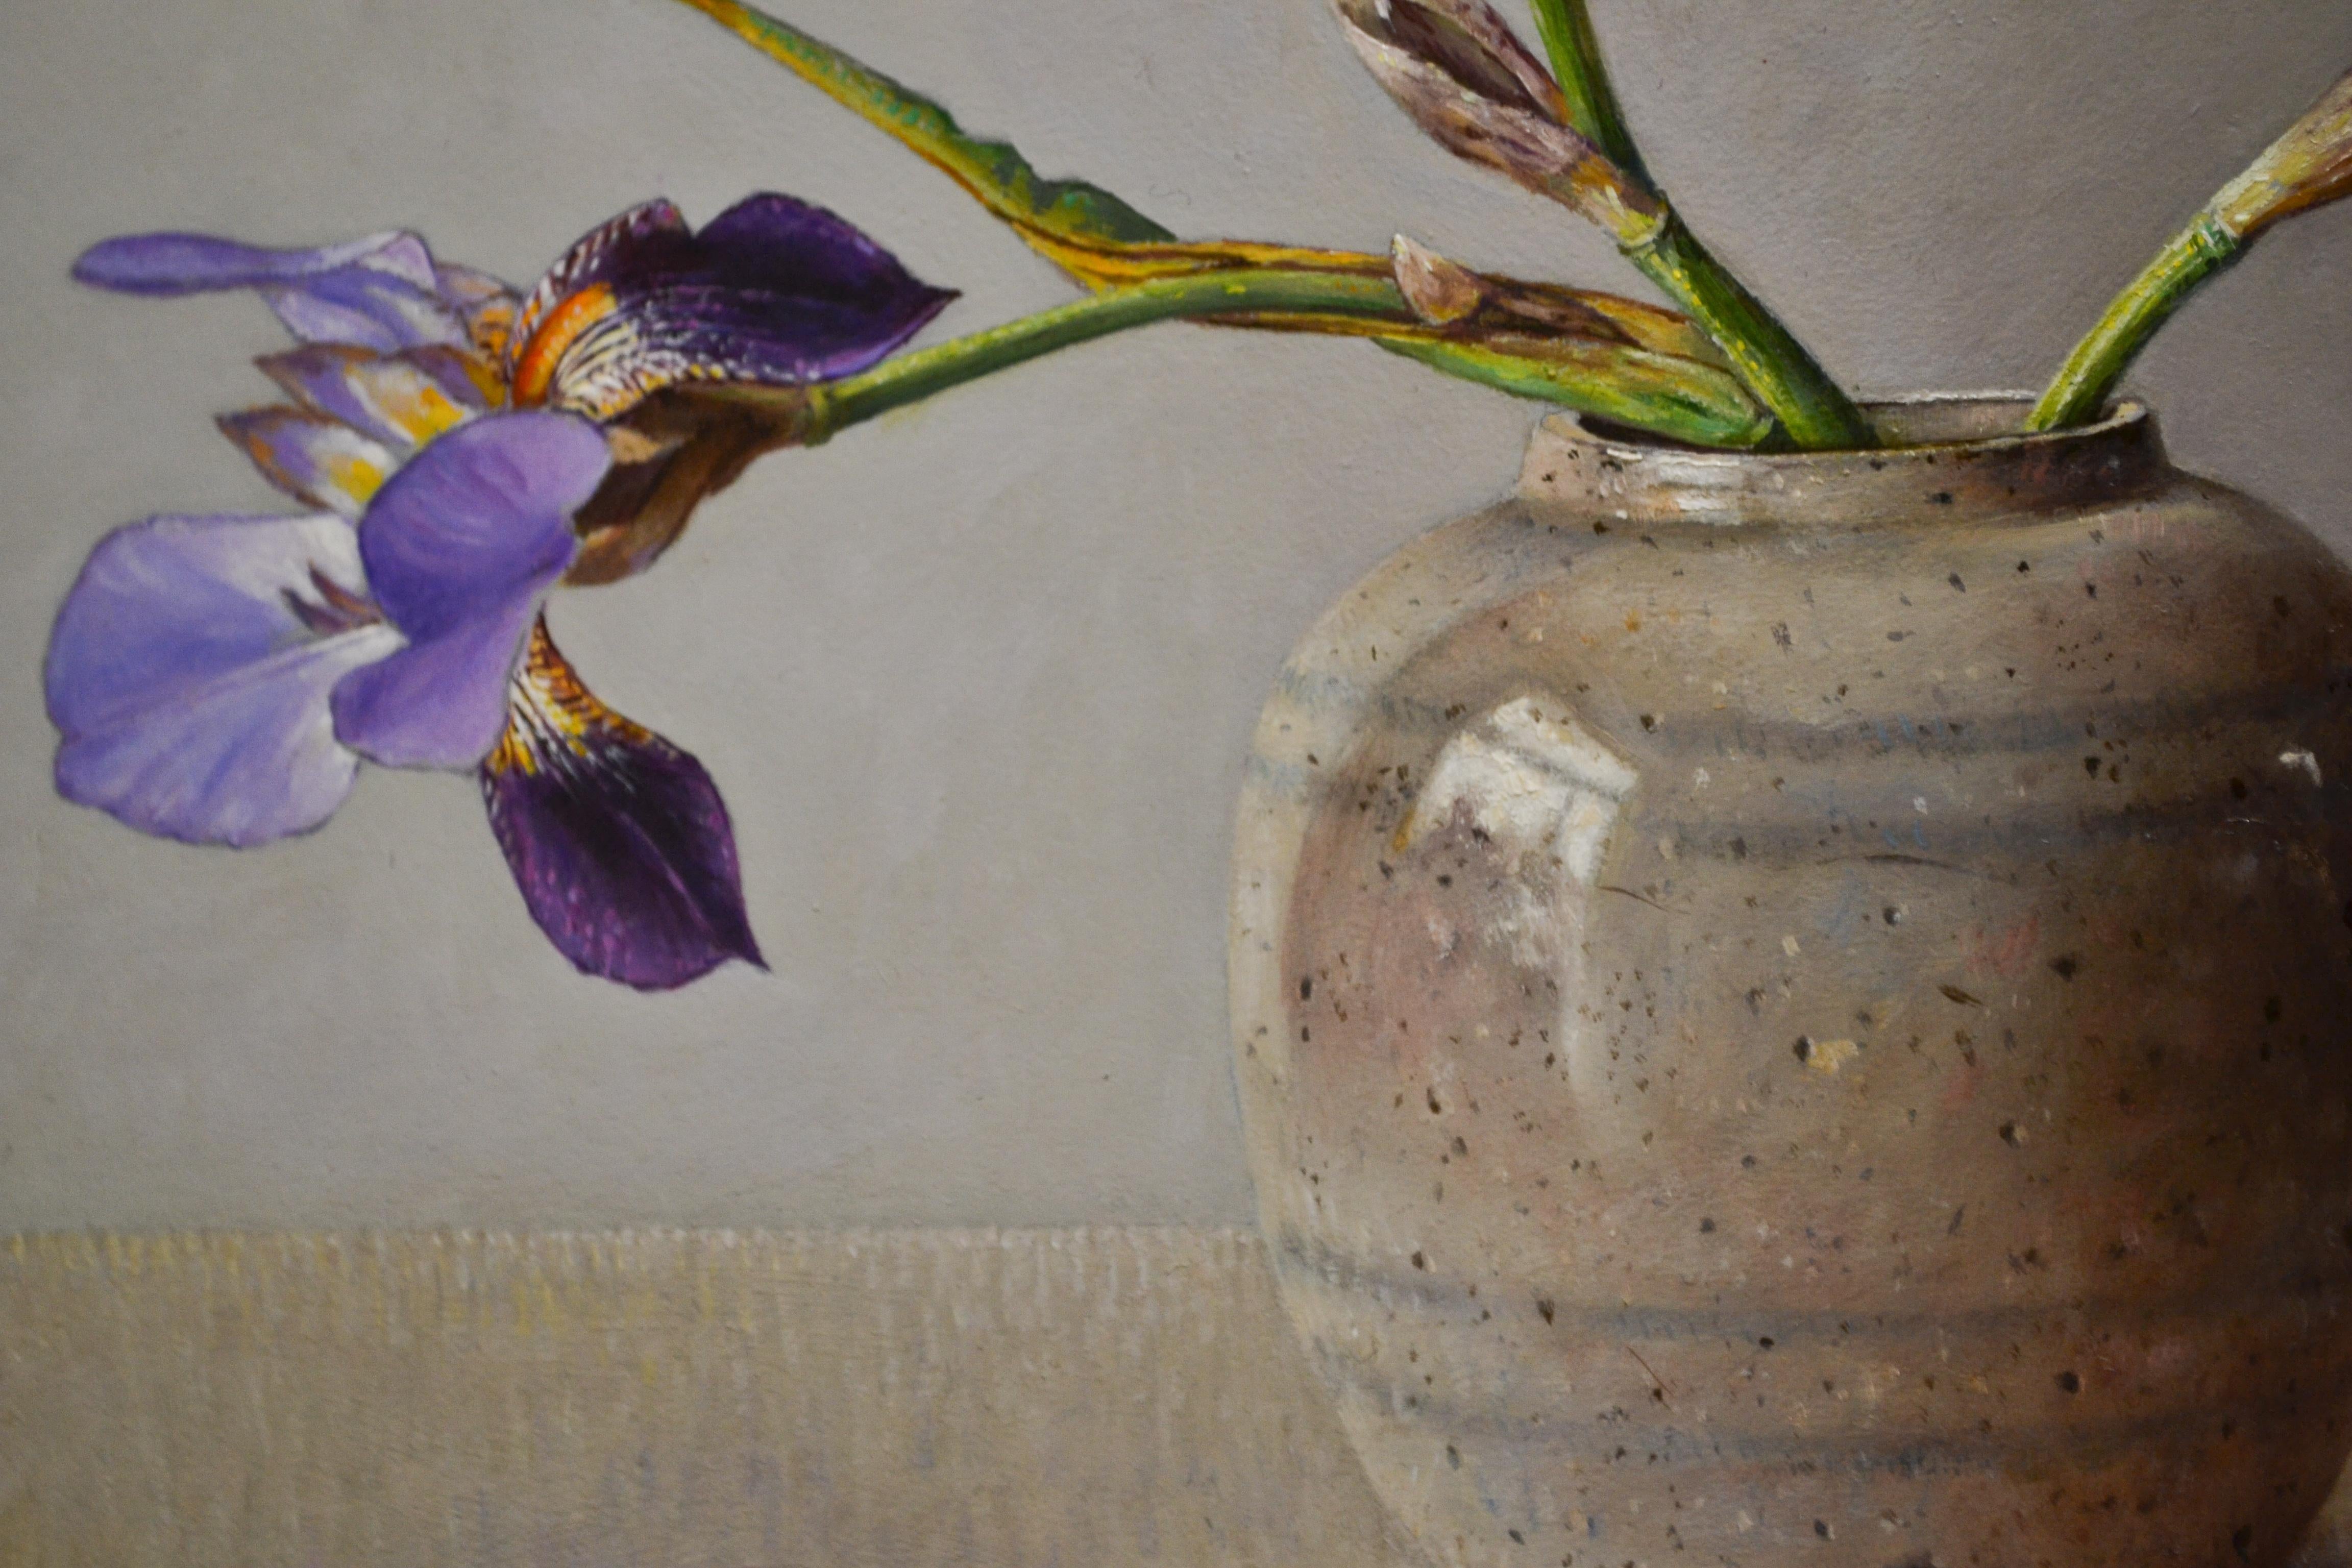 Iris in Old Ginger Jar, Ingrid Smuling, 21st Century Contemporary Painting 1